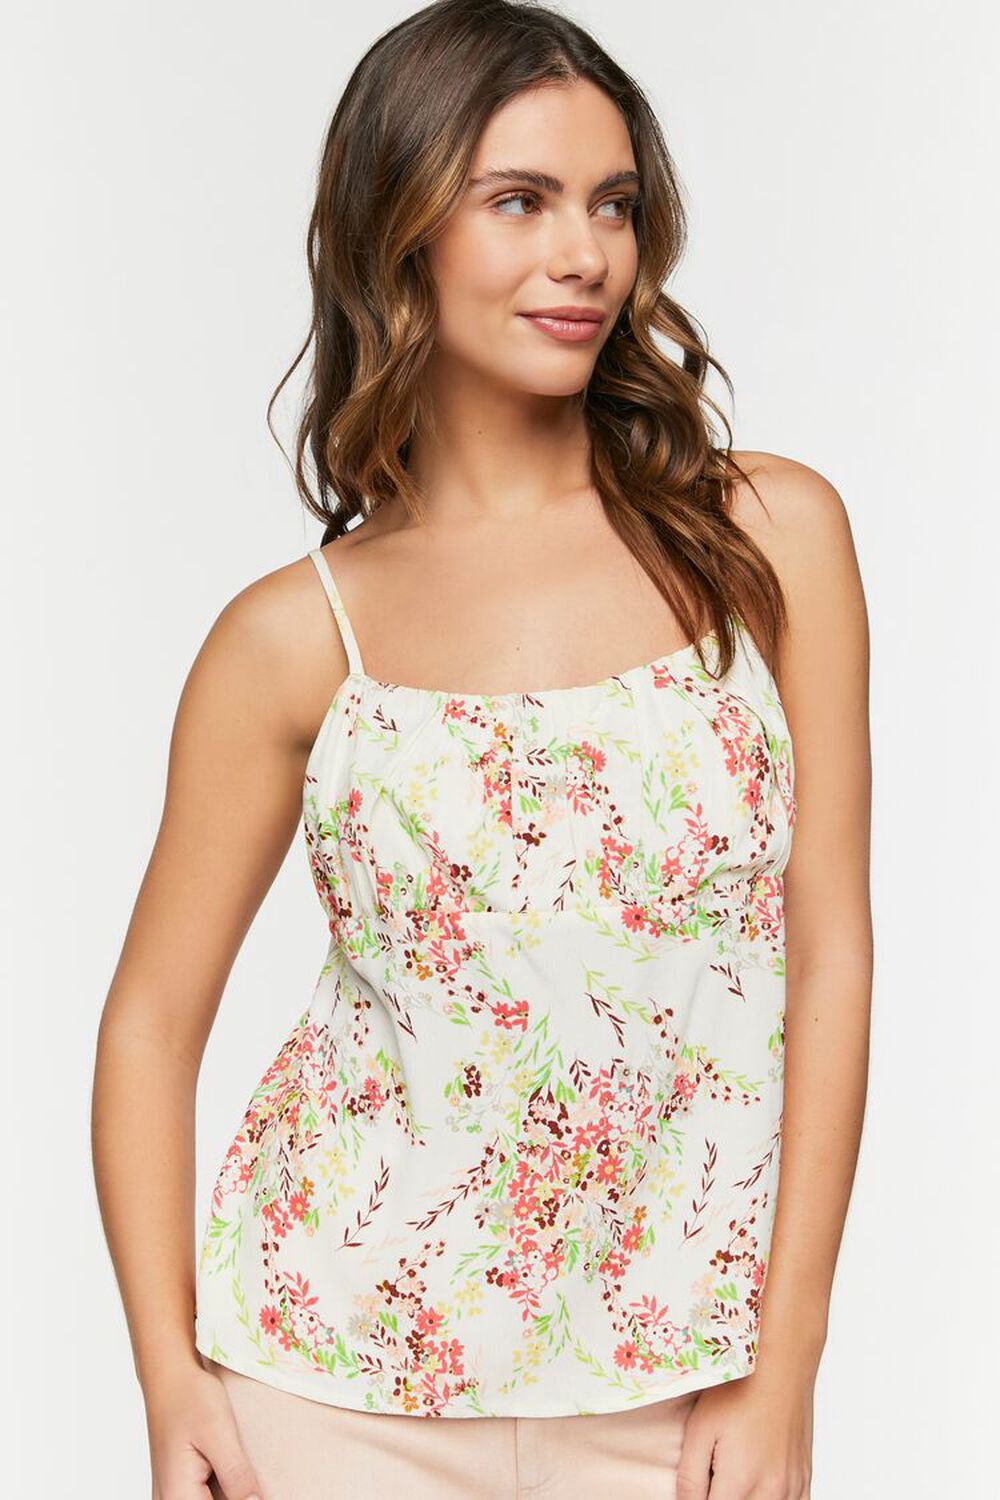 Floral Print Shirt with Camisole